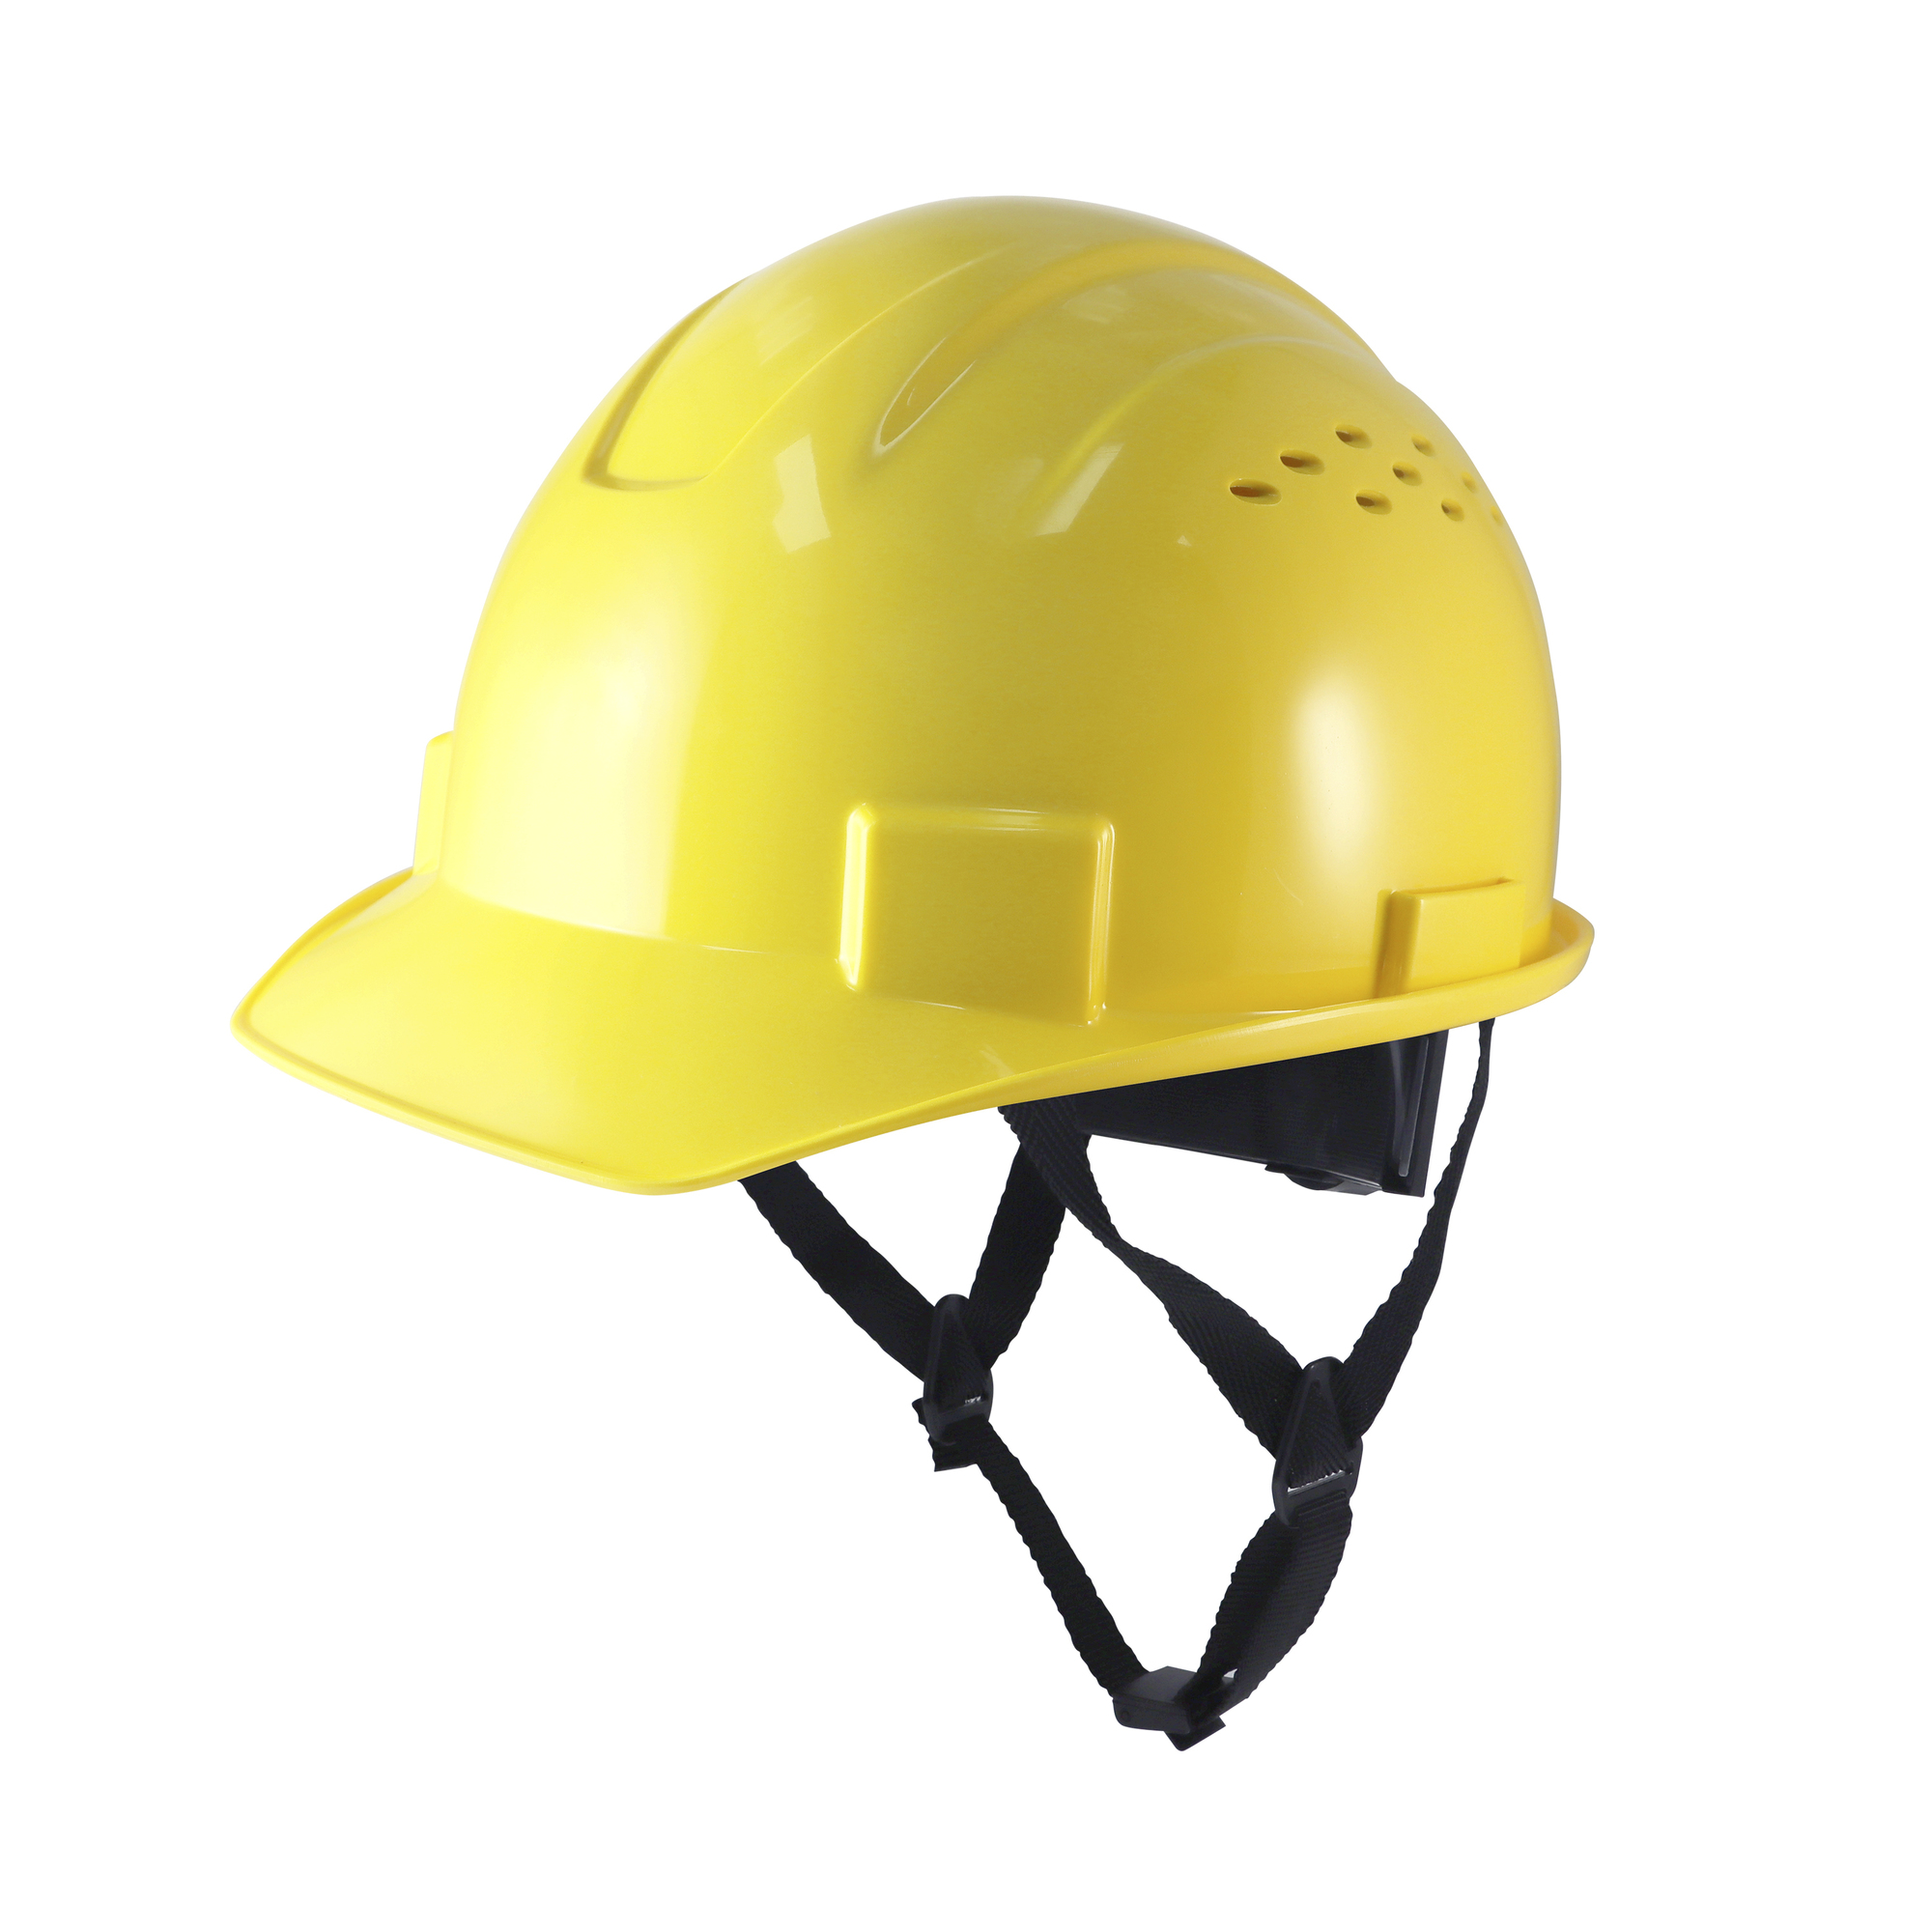 General Electric, Safety Helmet Vented- Yellow, Hard Hat Style Helmet, Hat Size One Size, Color Yellow, Model GH326Y